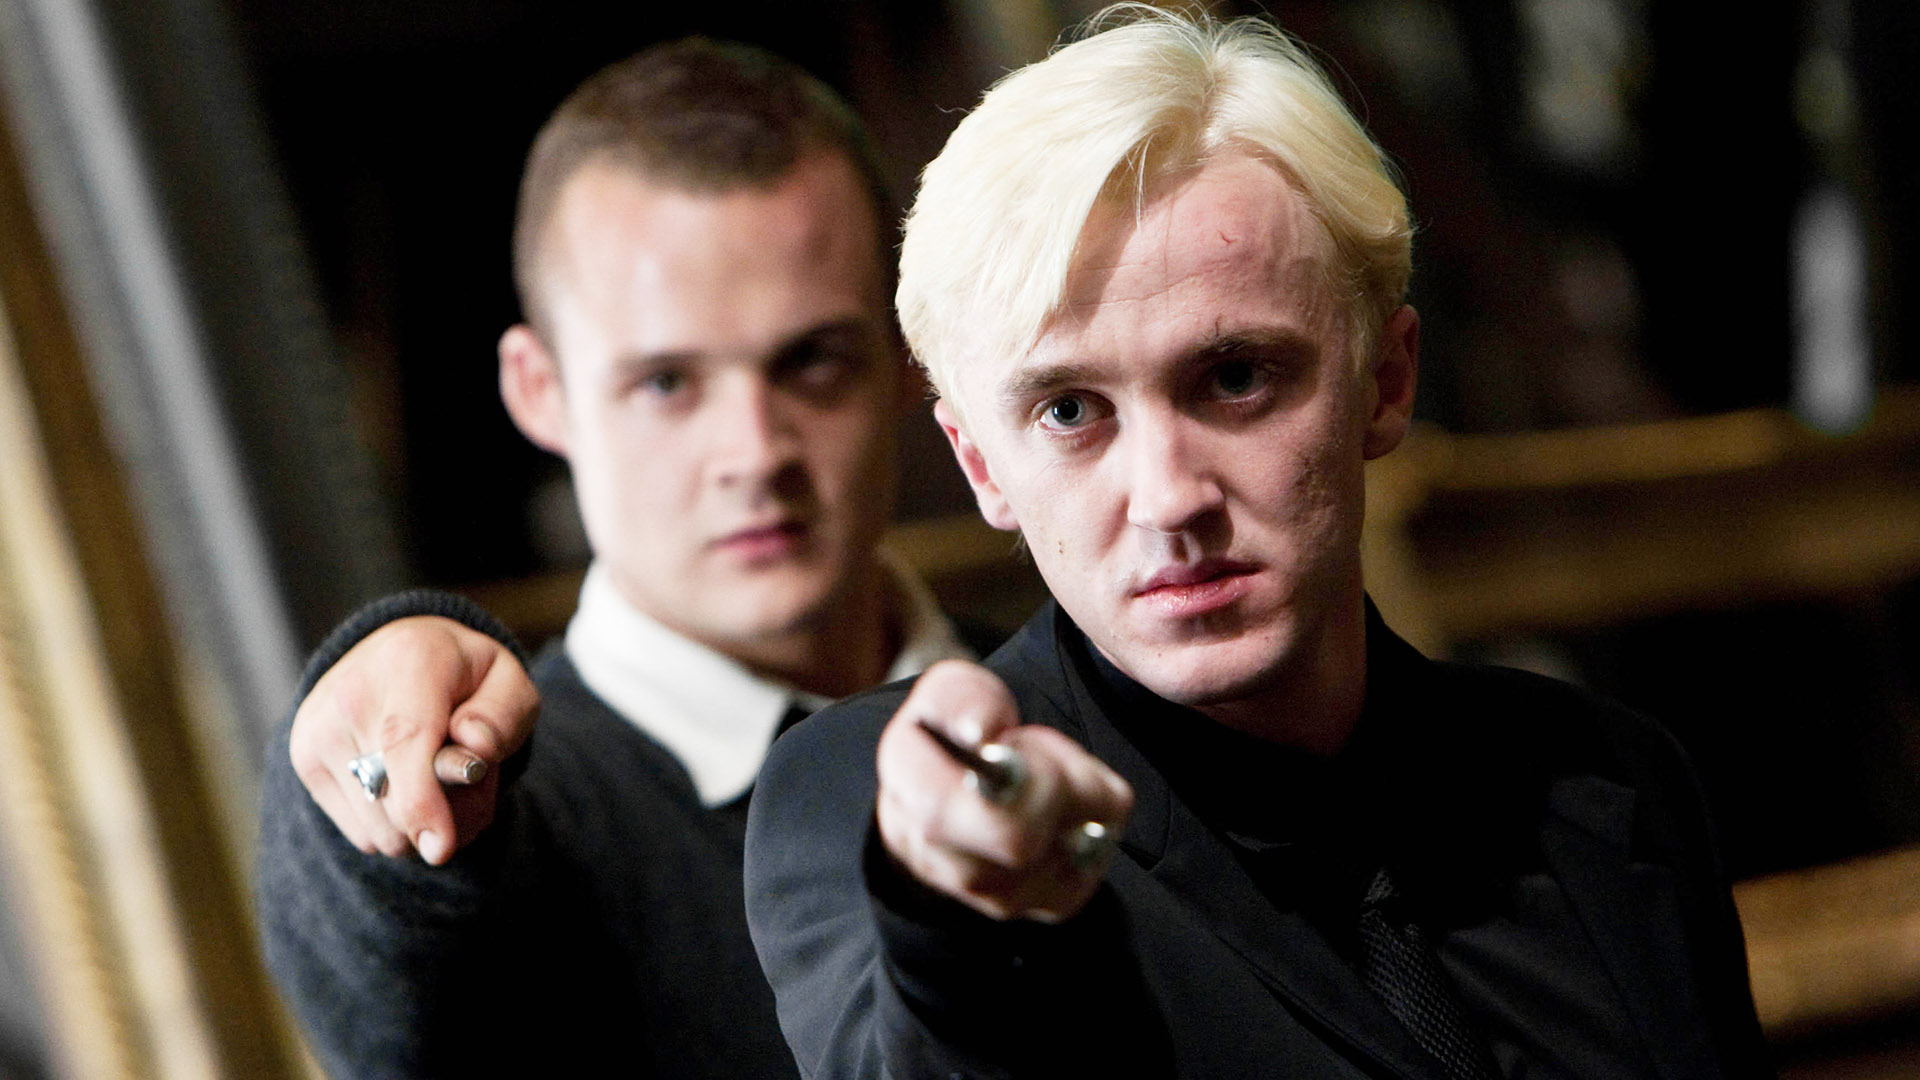 Tom Felton Wasn't Always Draco: He Auditioned for Ron Weasley First